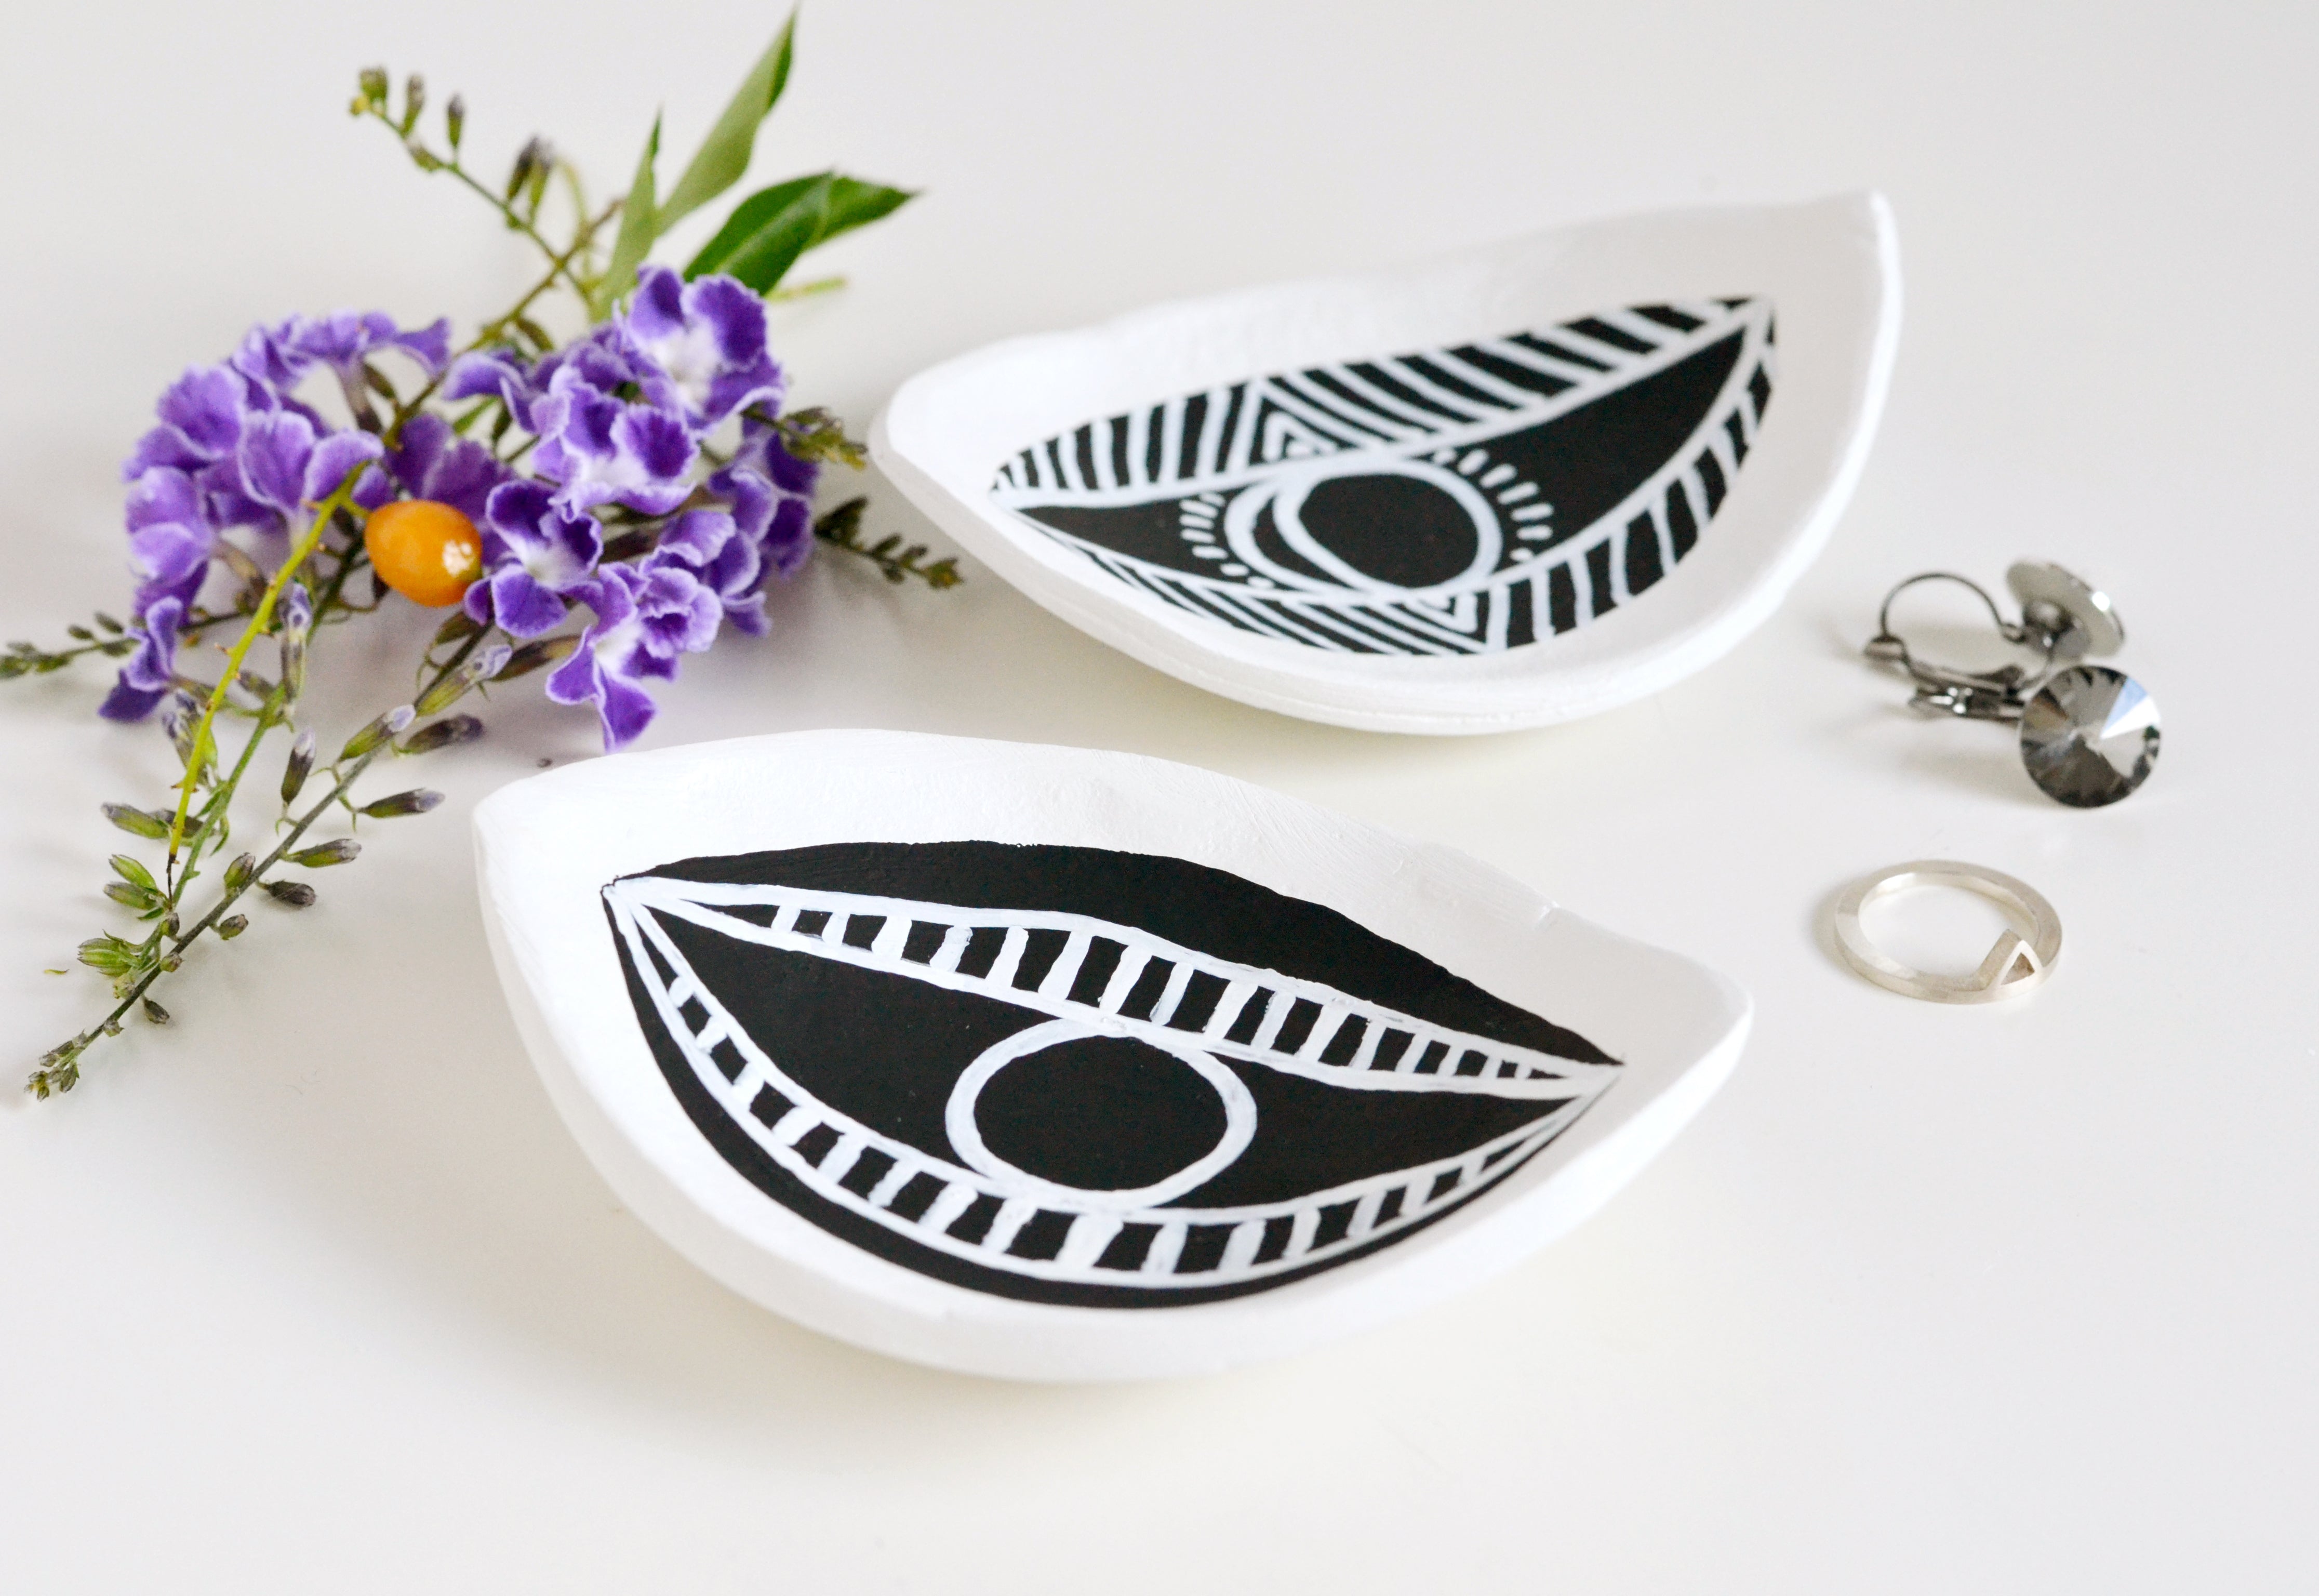 How to Make Two Clay Trinket Dishes